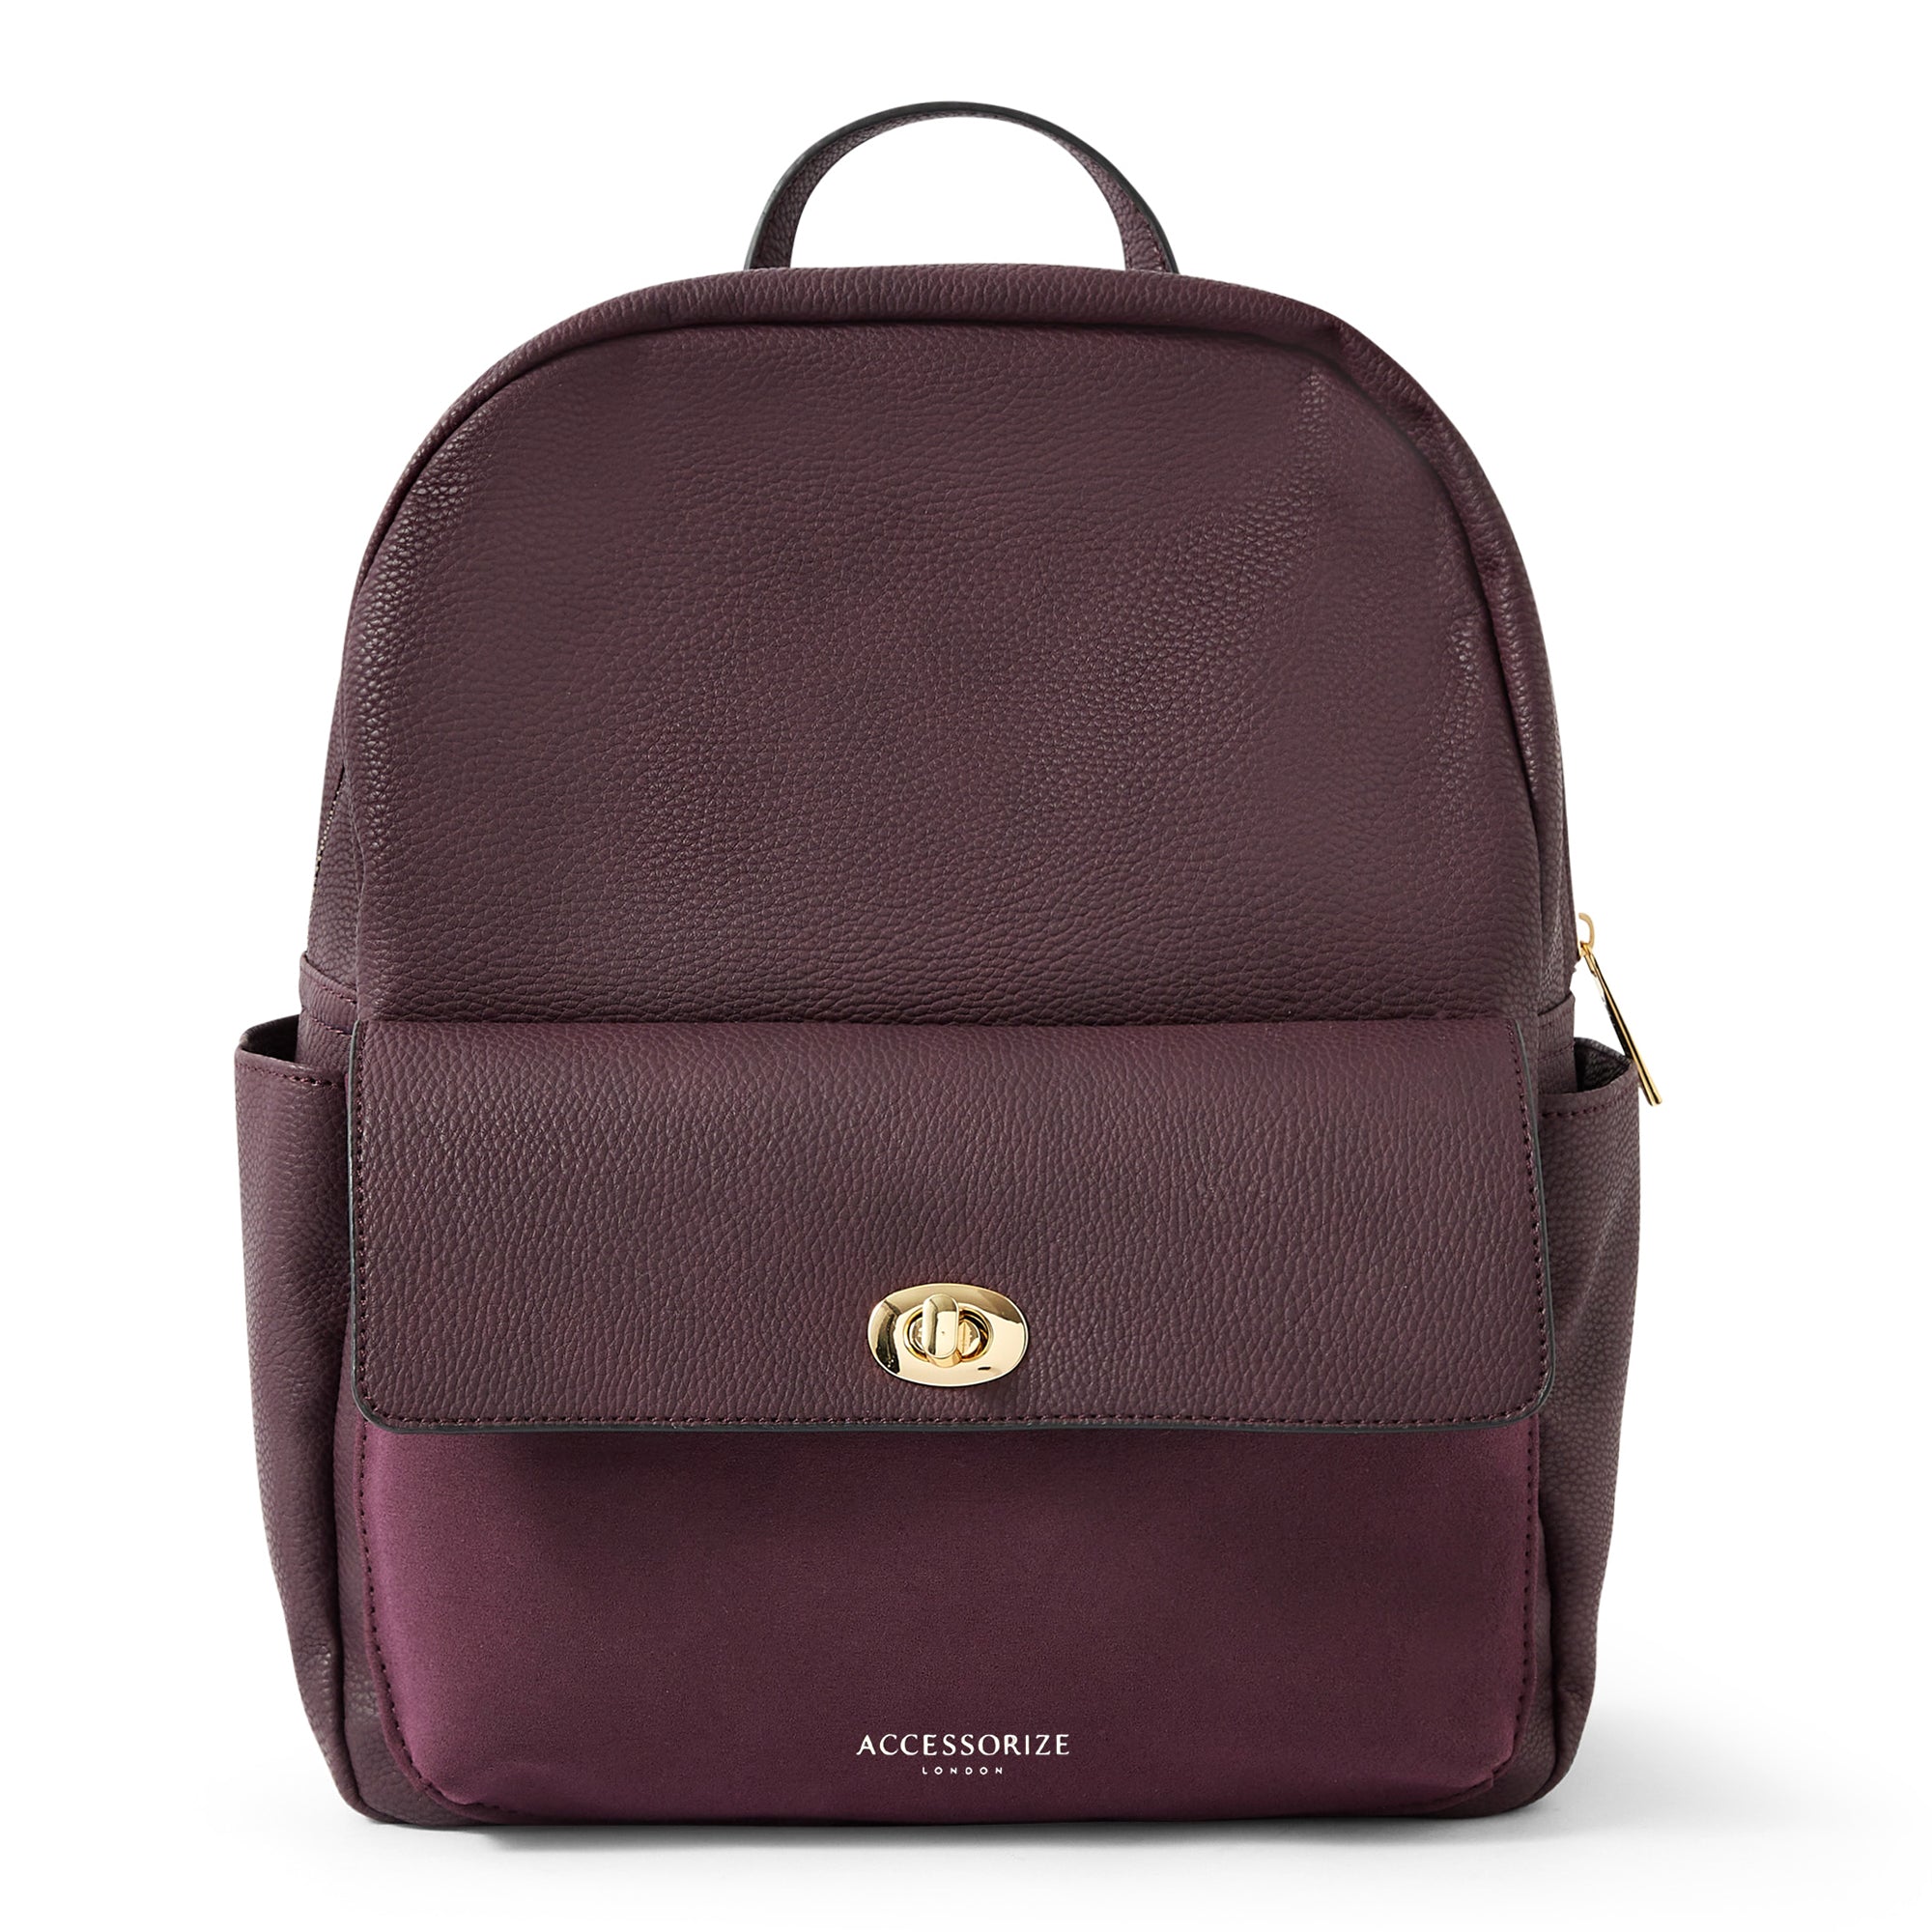 15 Purses That Convert To Backpacks To Give You Way More Options | HuffPost  Life